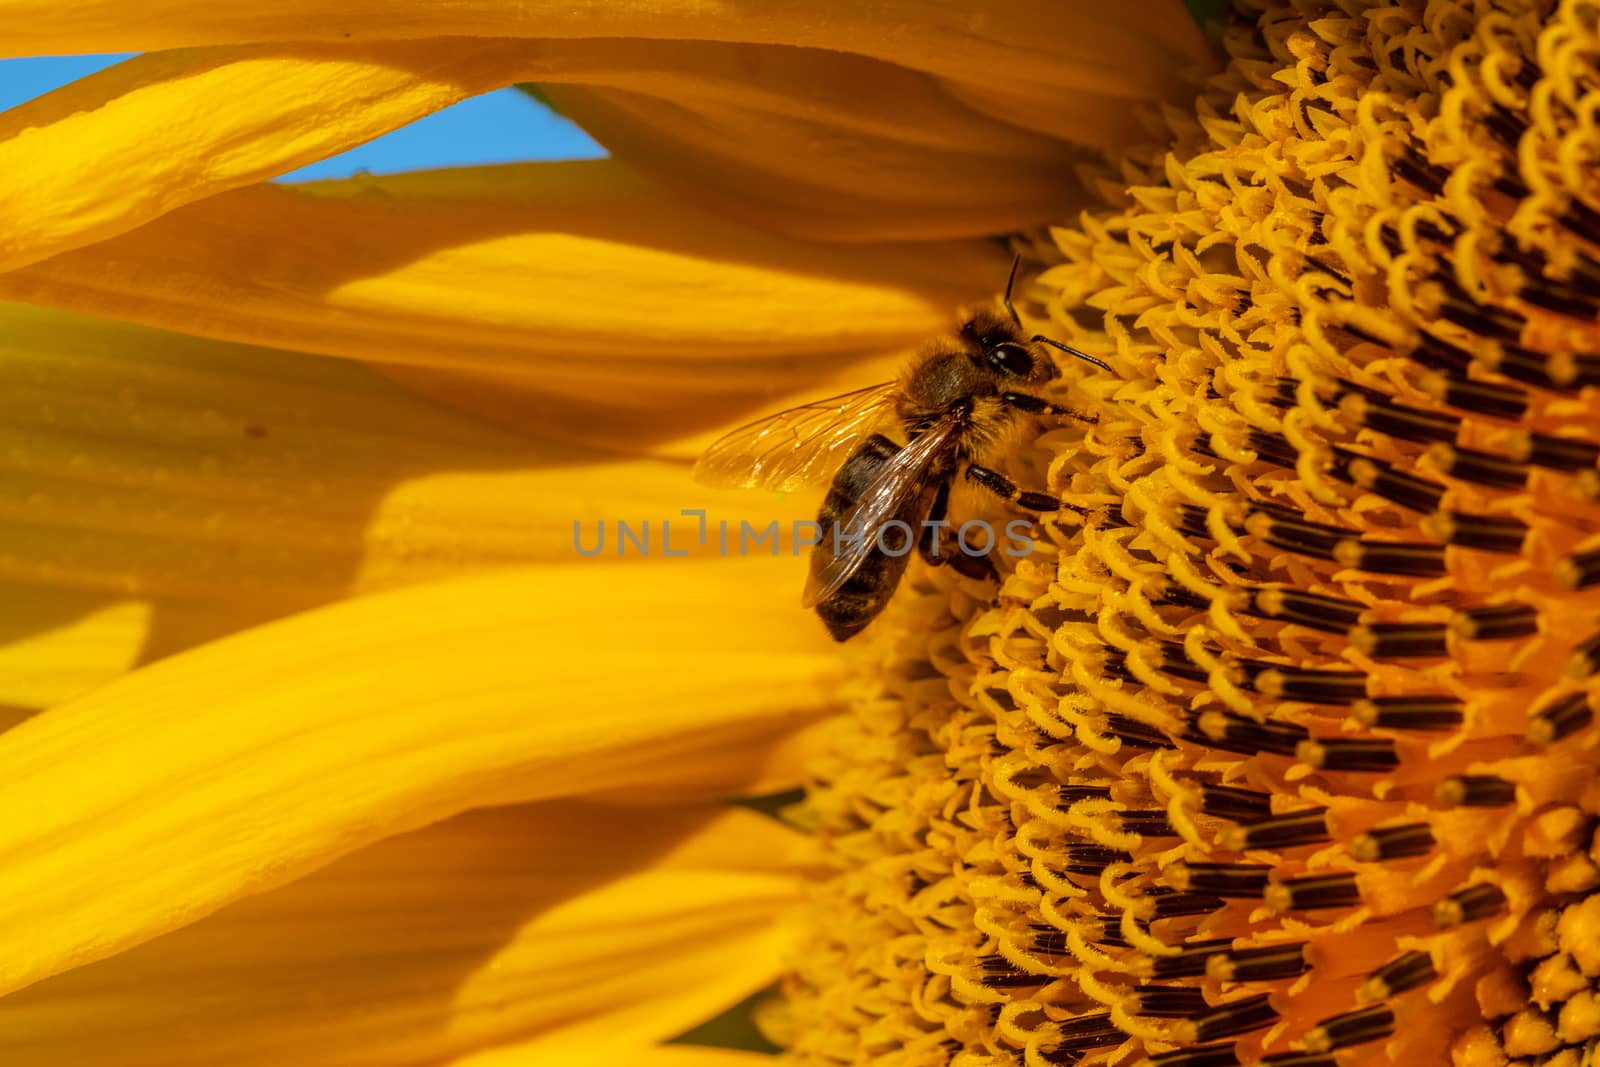 Honey Bee on Sunflower, close up by asafaric